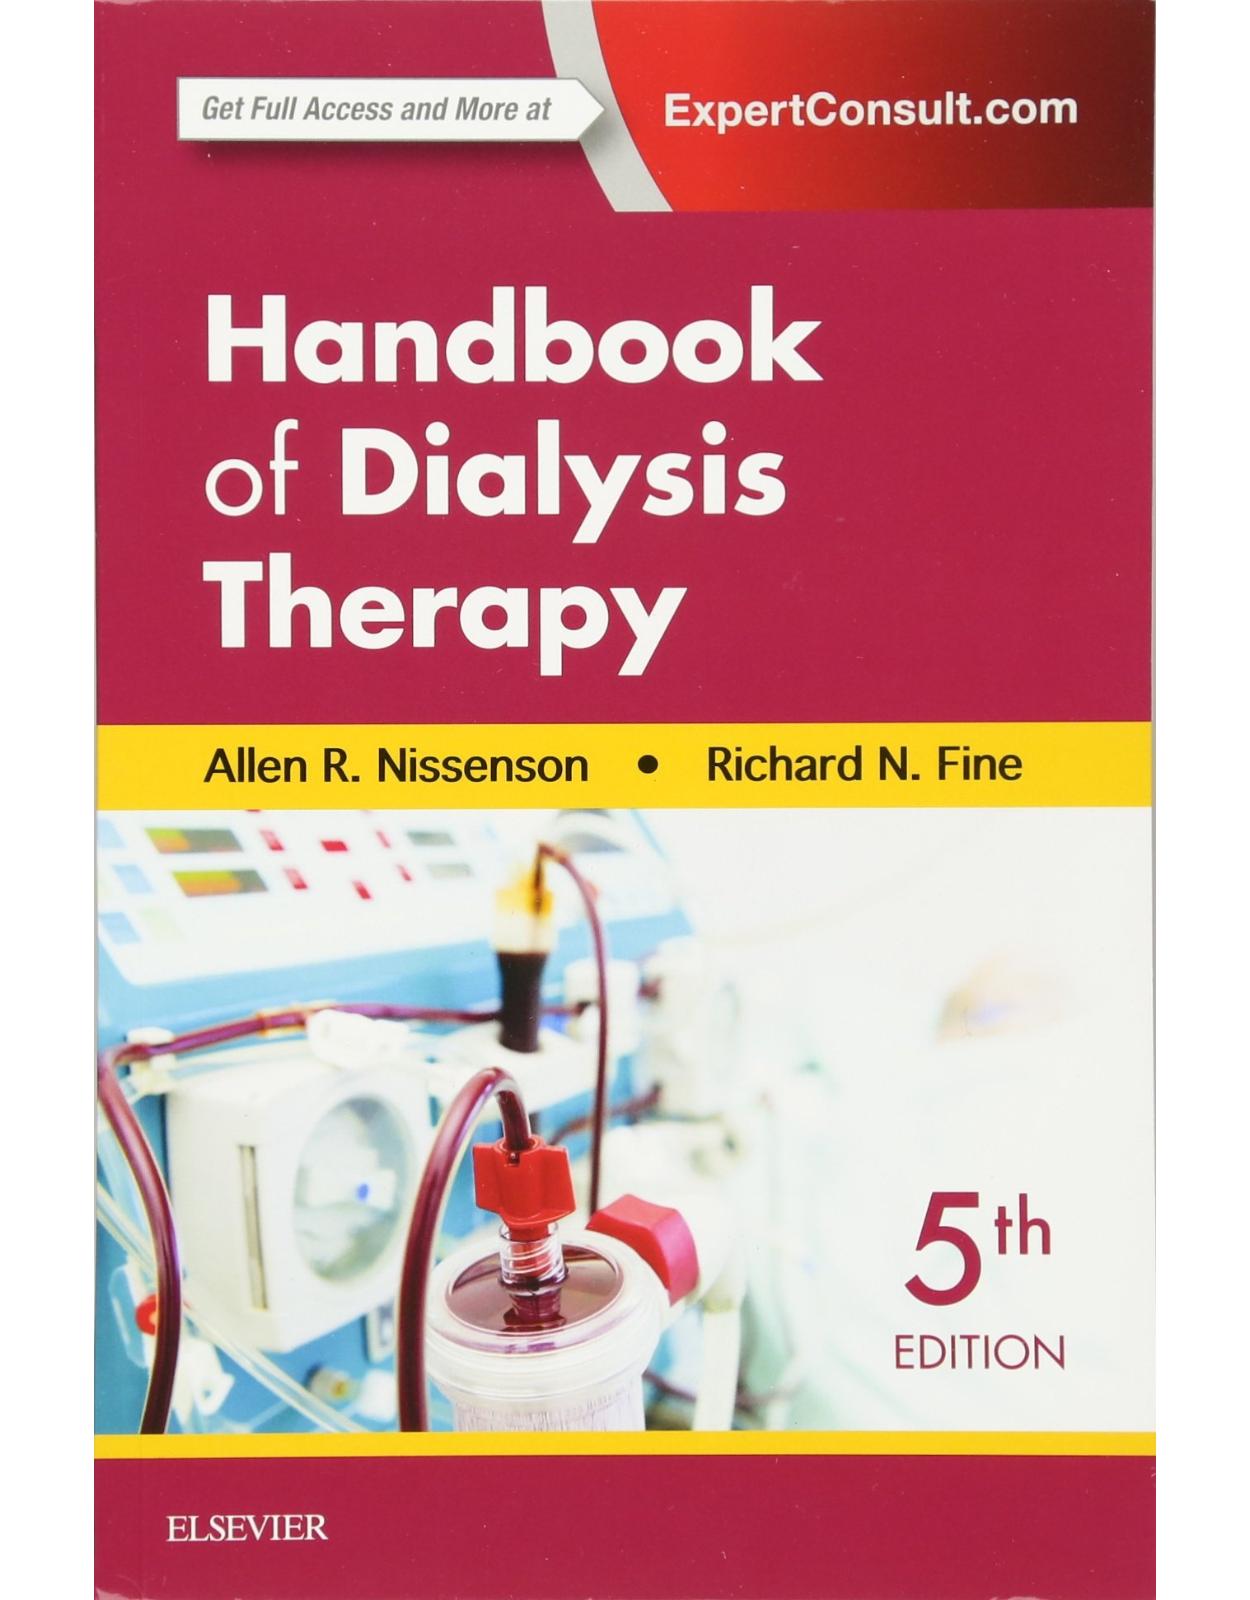 Handbook of Dialysis Therapy, 5th Edition